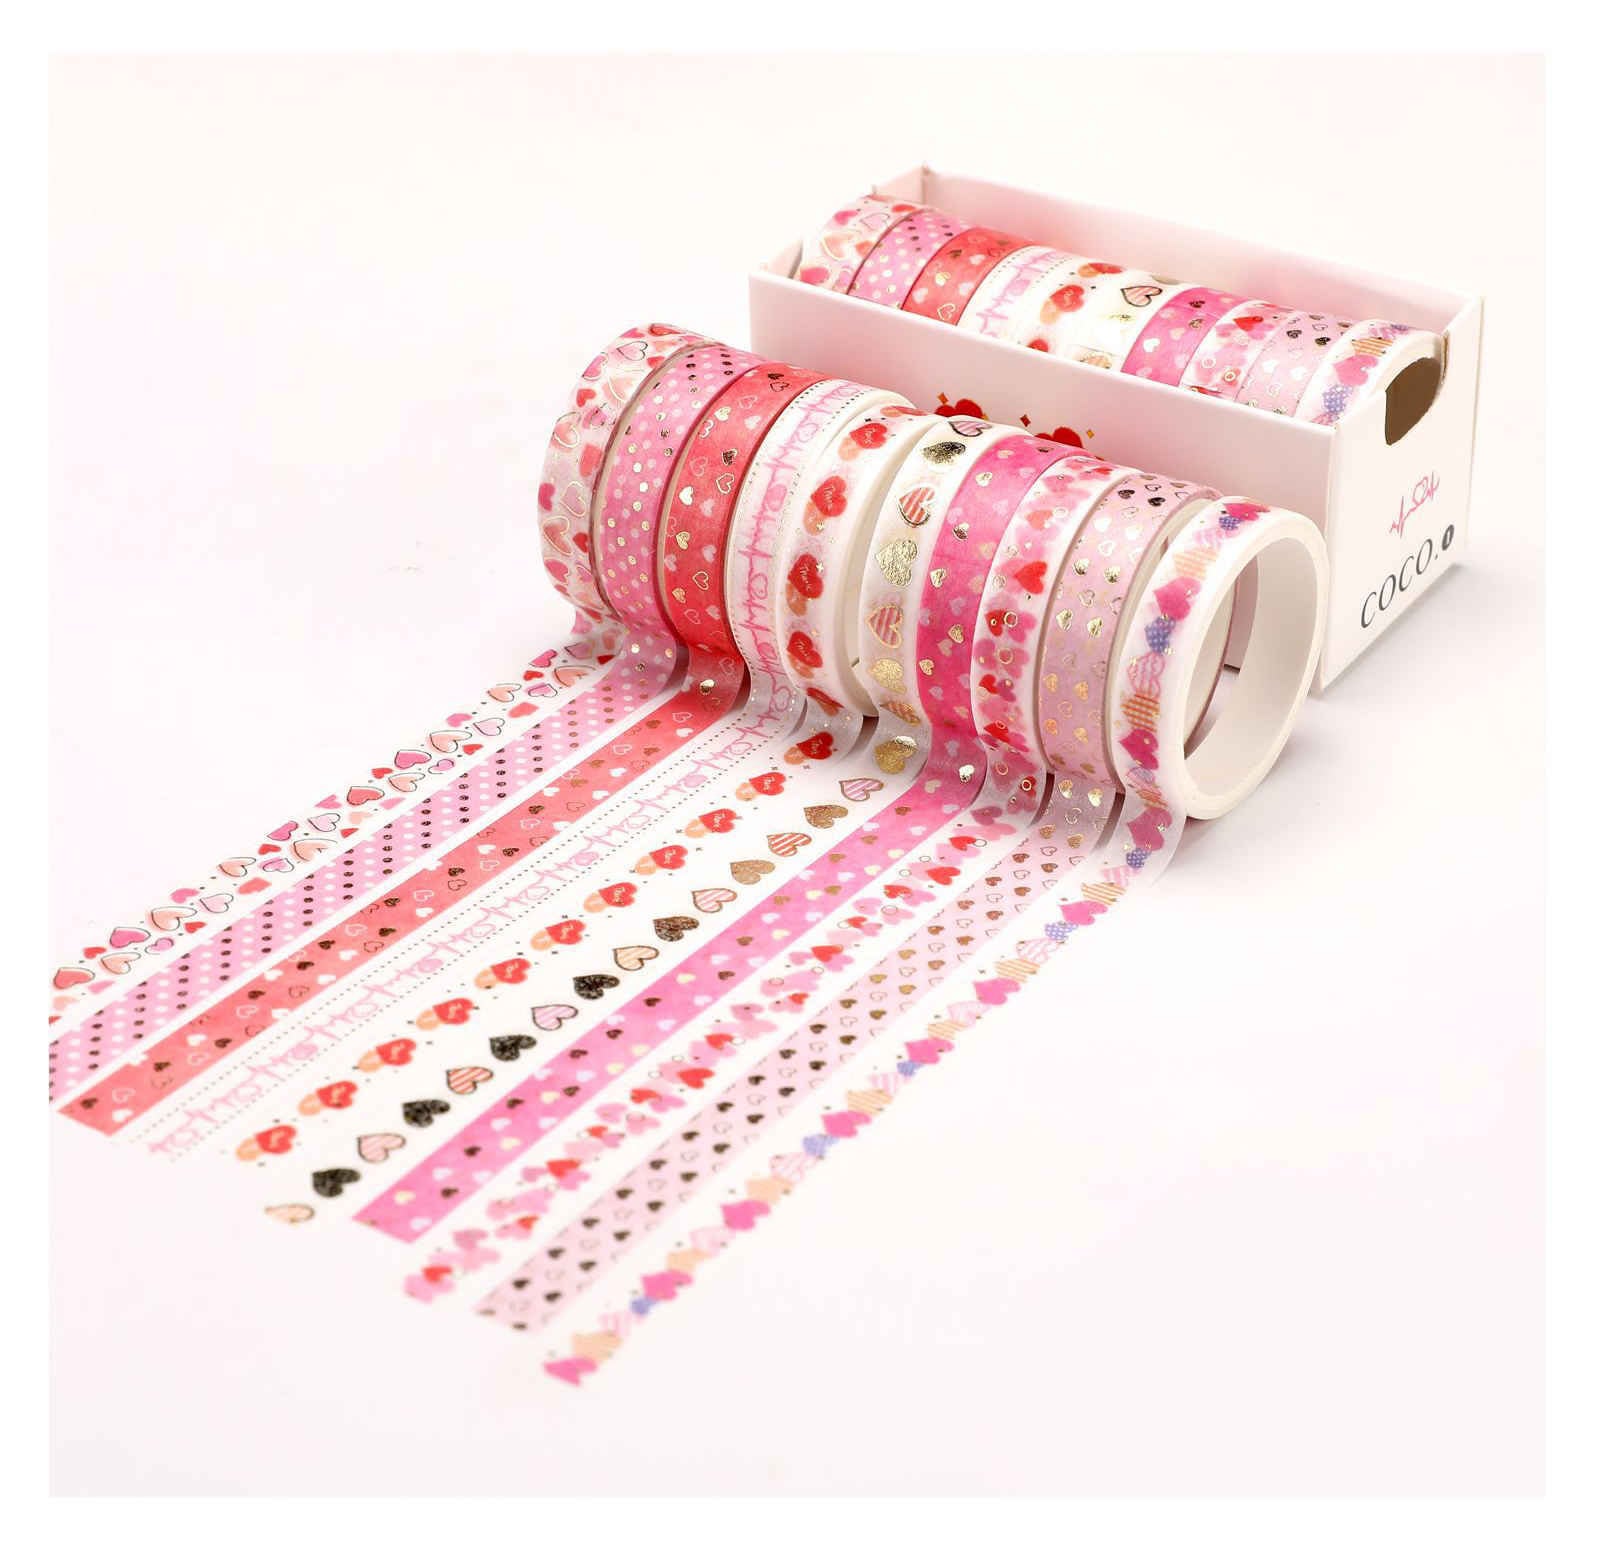 Washi Tape 15mm Neon Pink and White Diagonal Stripes Deco Paper